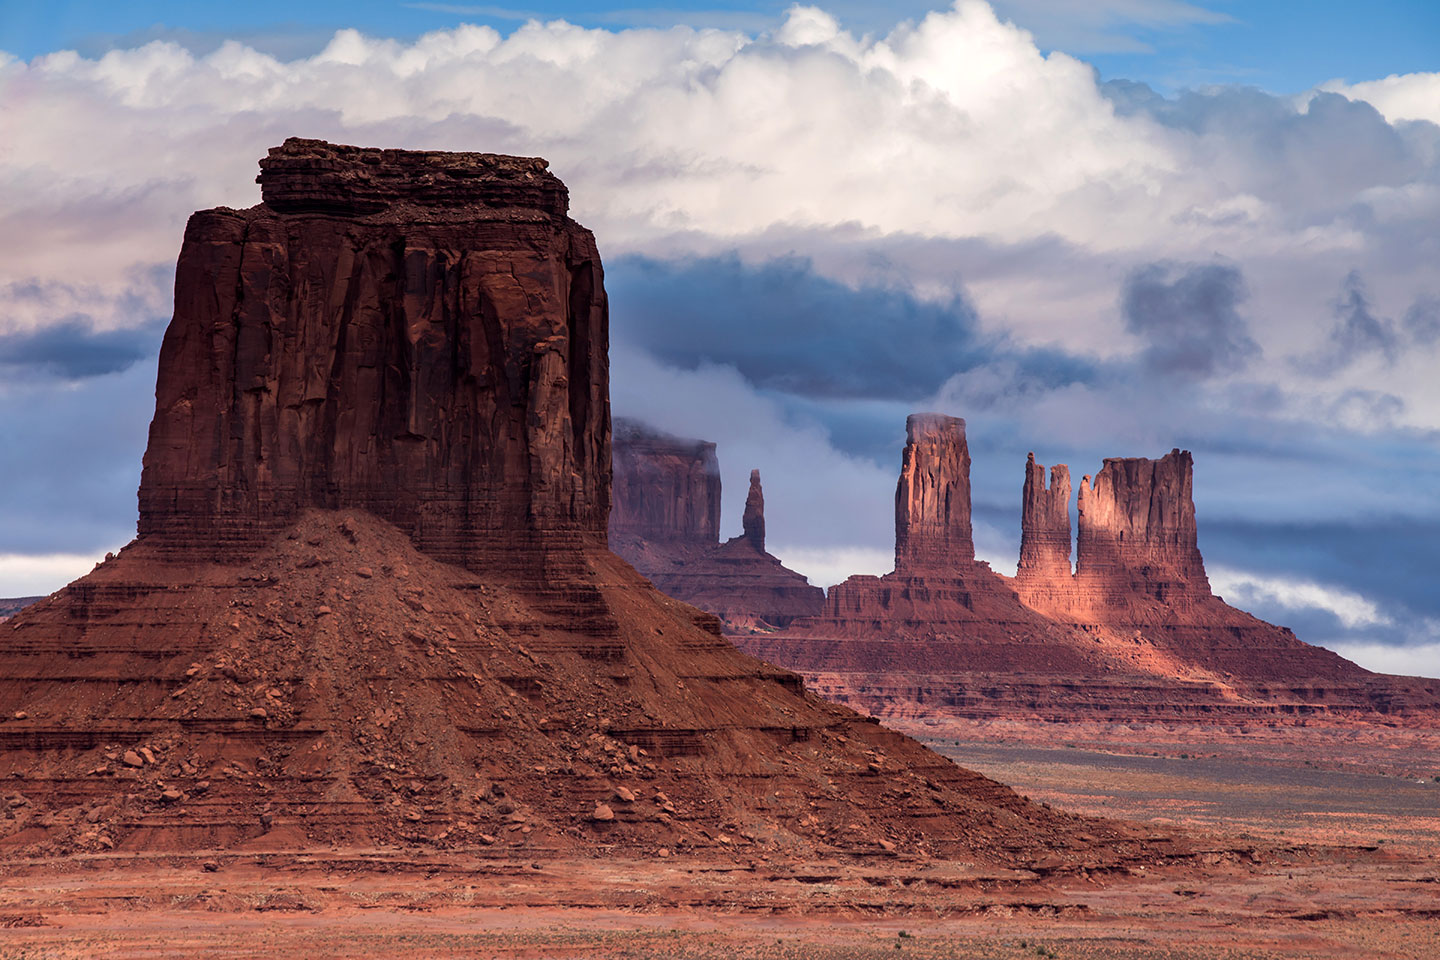 View inside Monument Valley National Park in Arizona